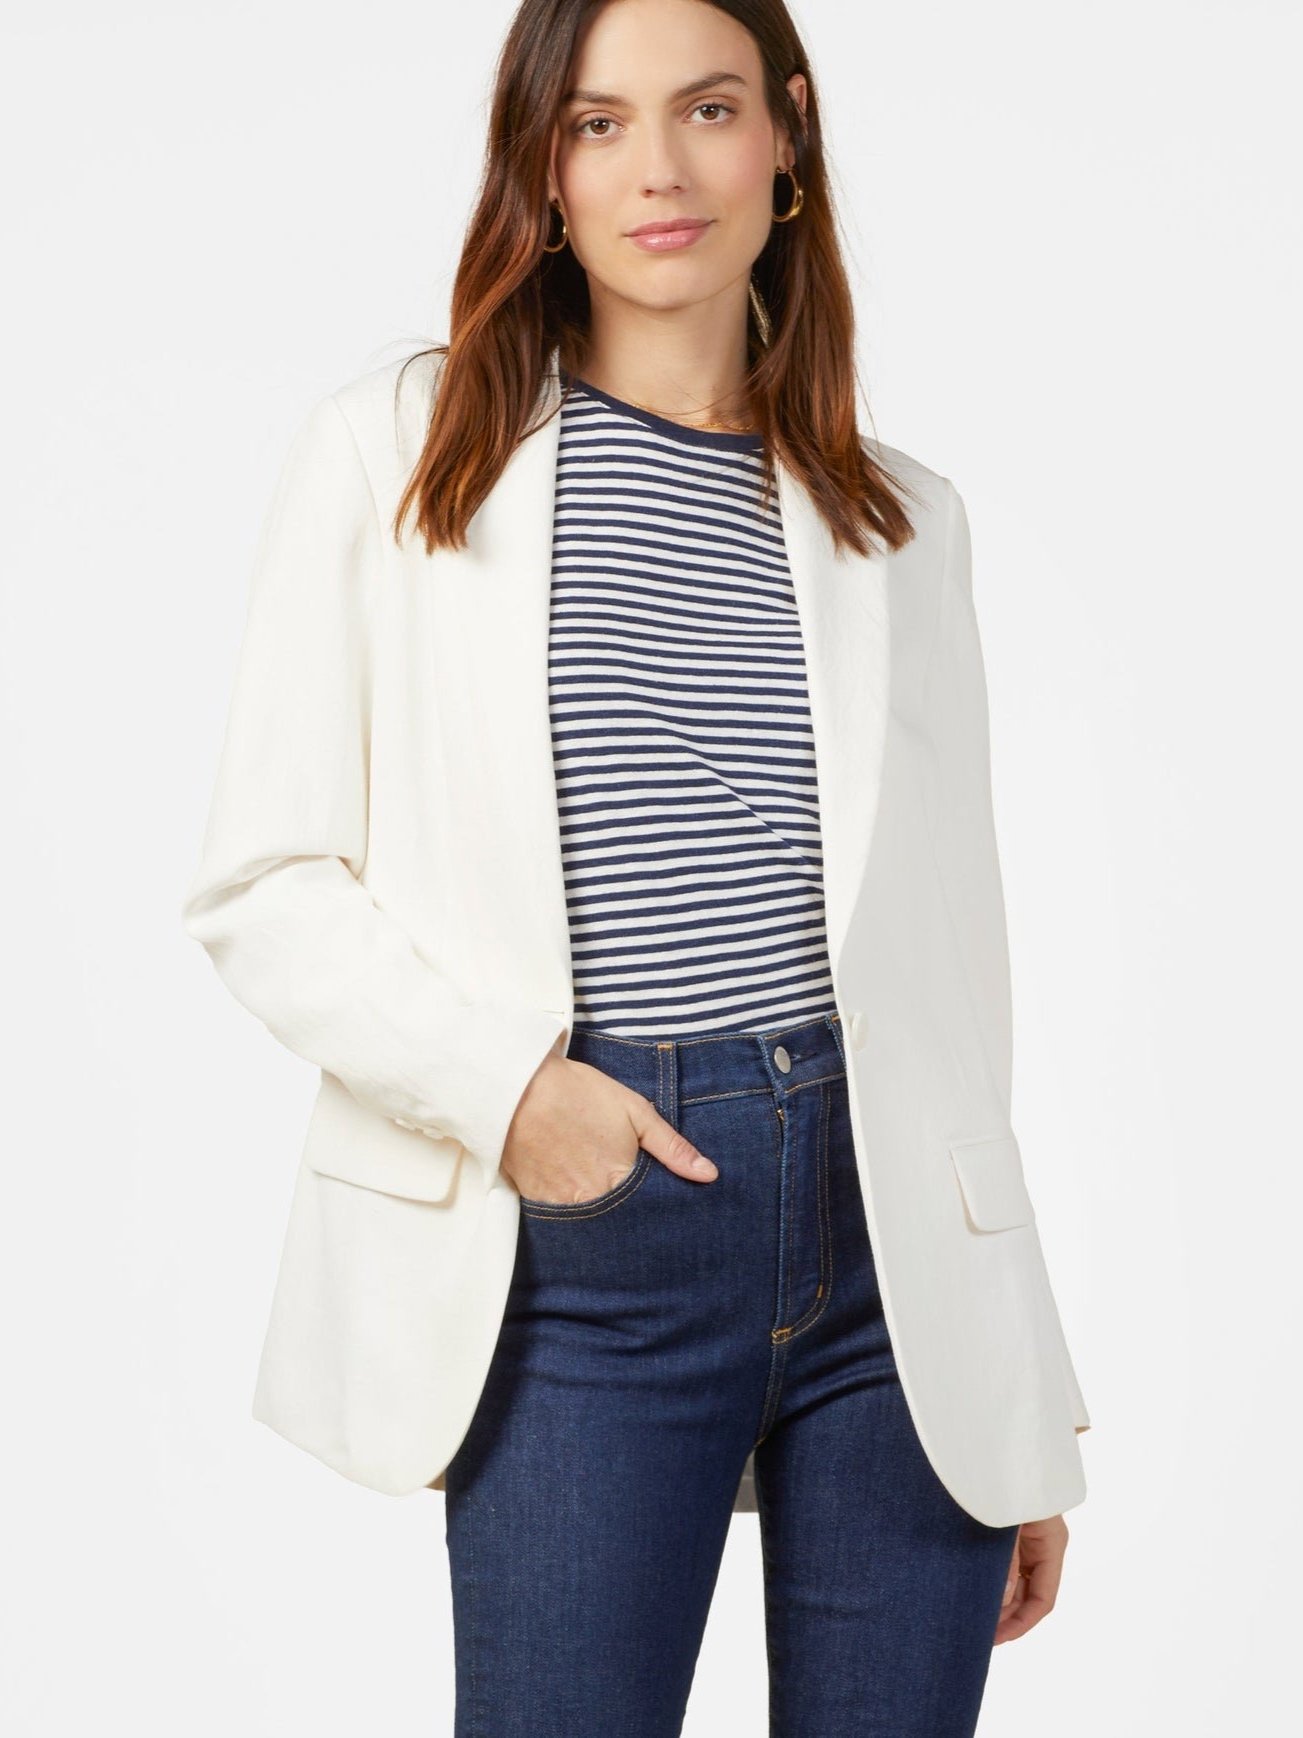 12 Sustainable Blazers For Women & Men Who Want To Elevate Their Looks —  Sustainably Chic